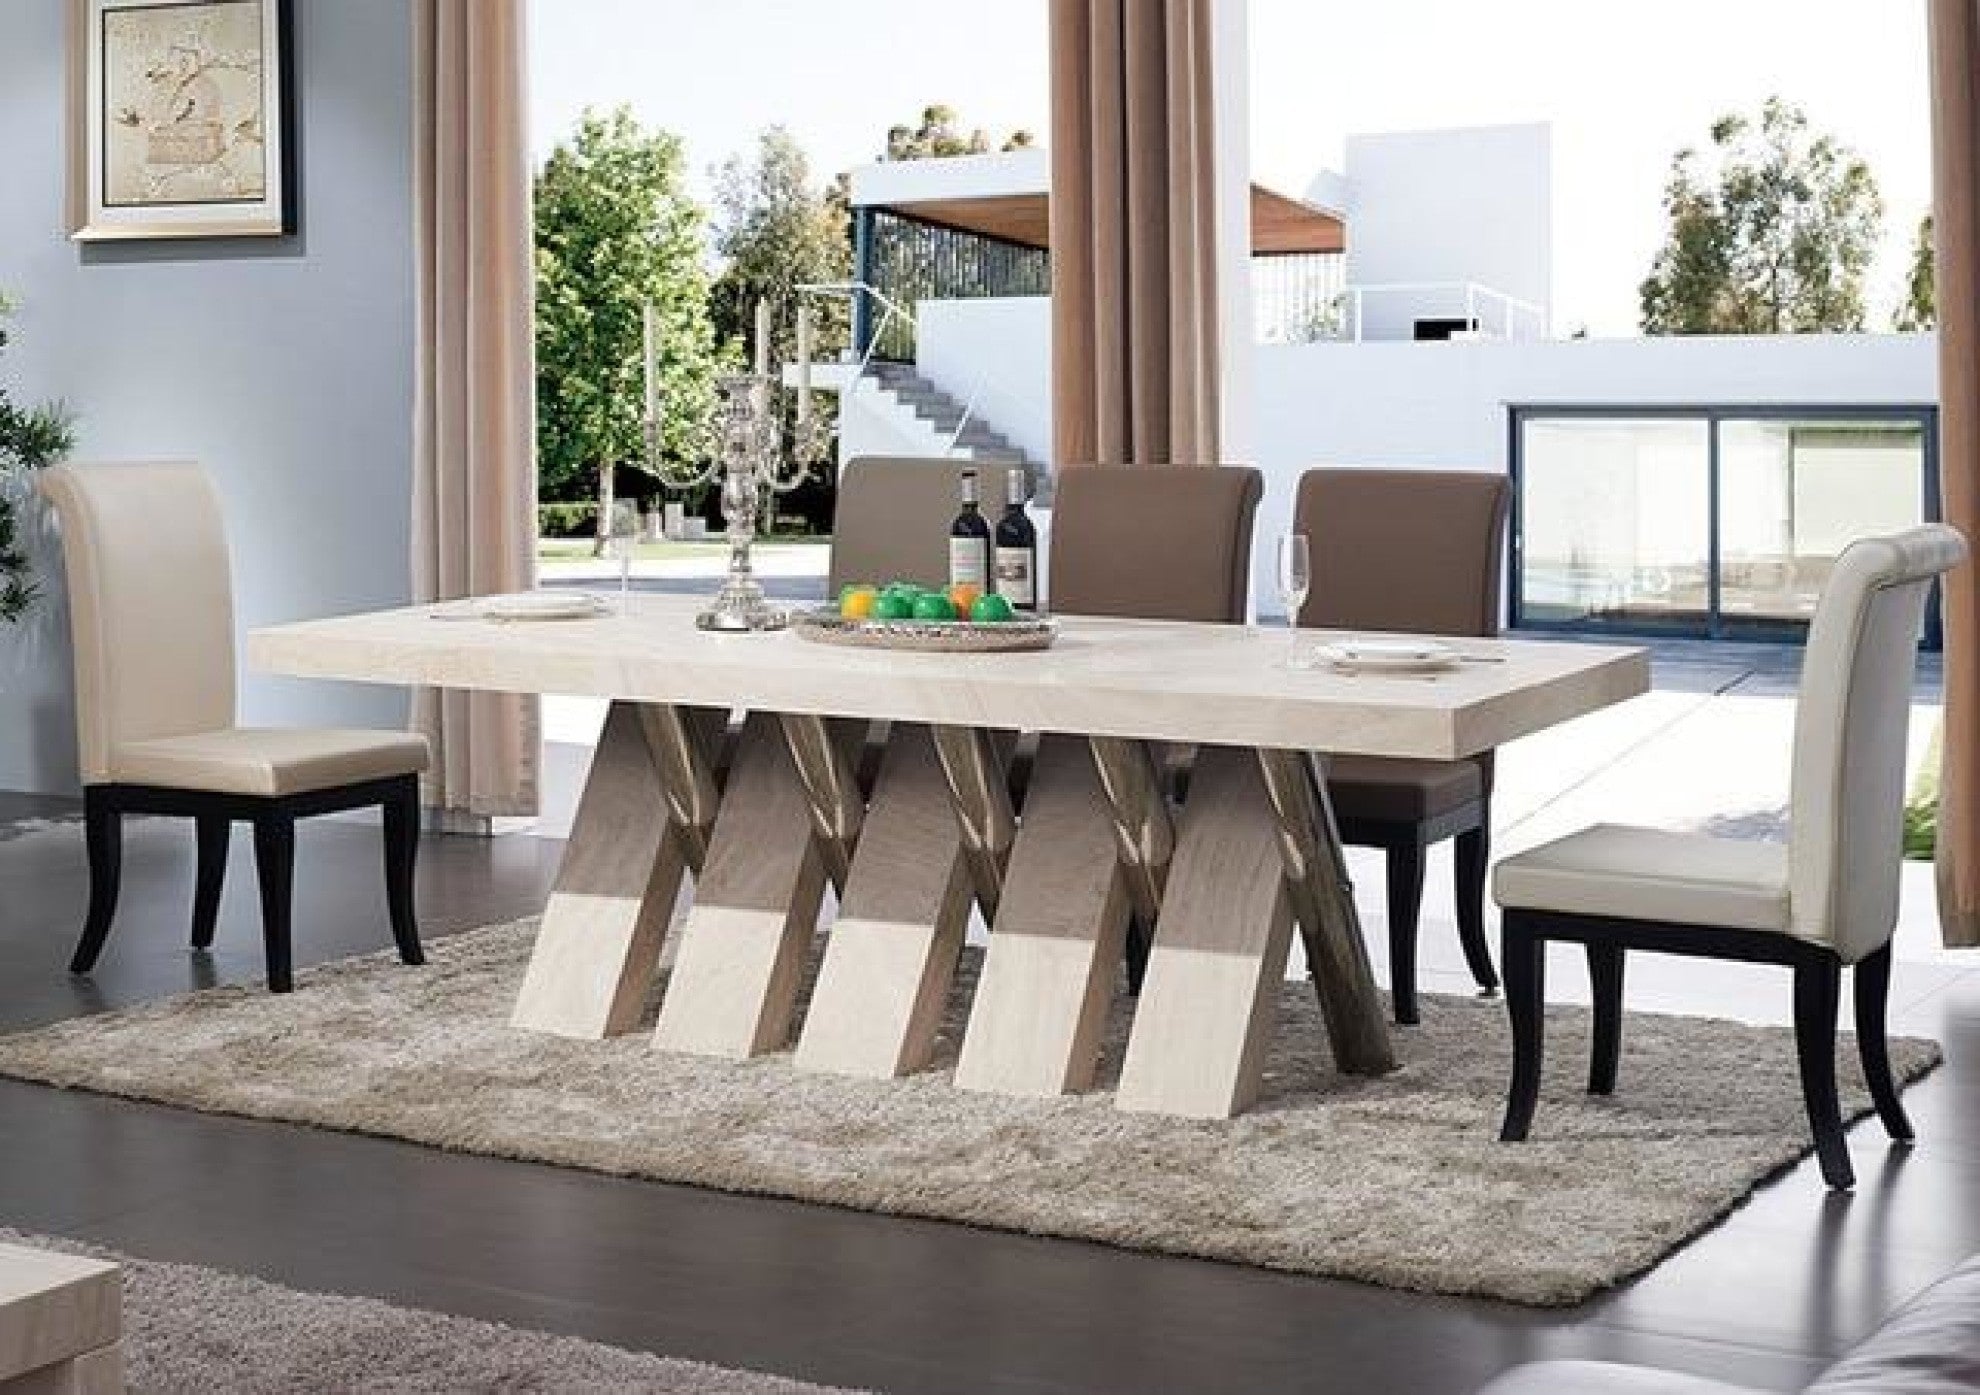 Marble Dining Table Set 12 Seater : Marble dining table and chair